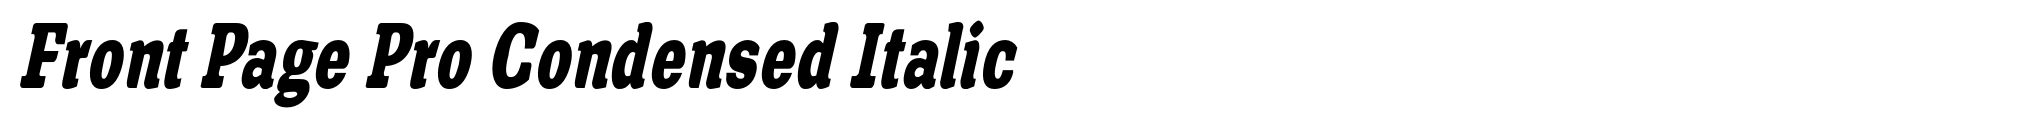 Front Page Pro Condensed Italic image